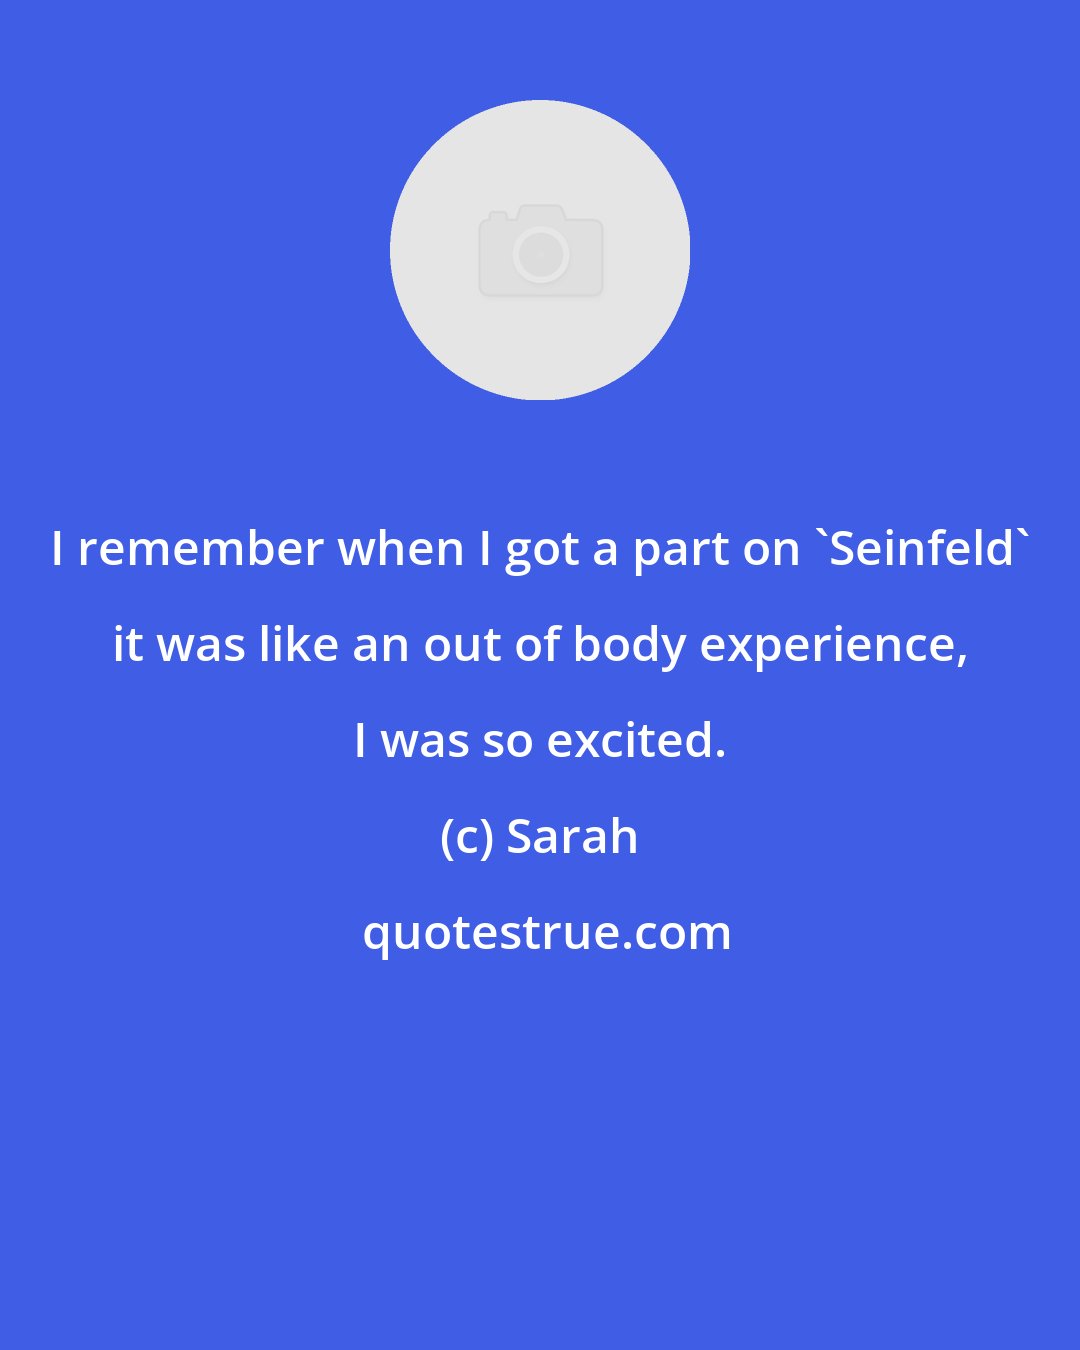 Sarah: I remember when I got a part on 'Seinfeld' it was like an out of body experience, I was so excited.